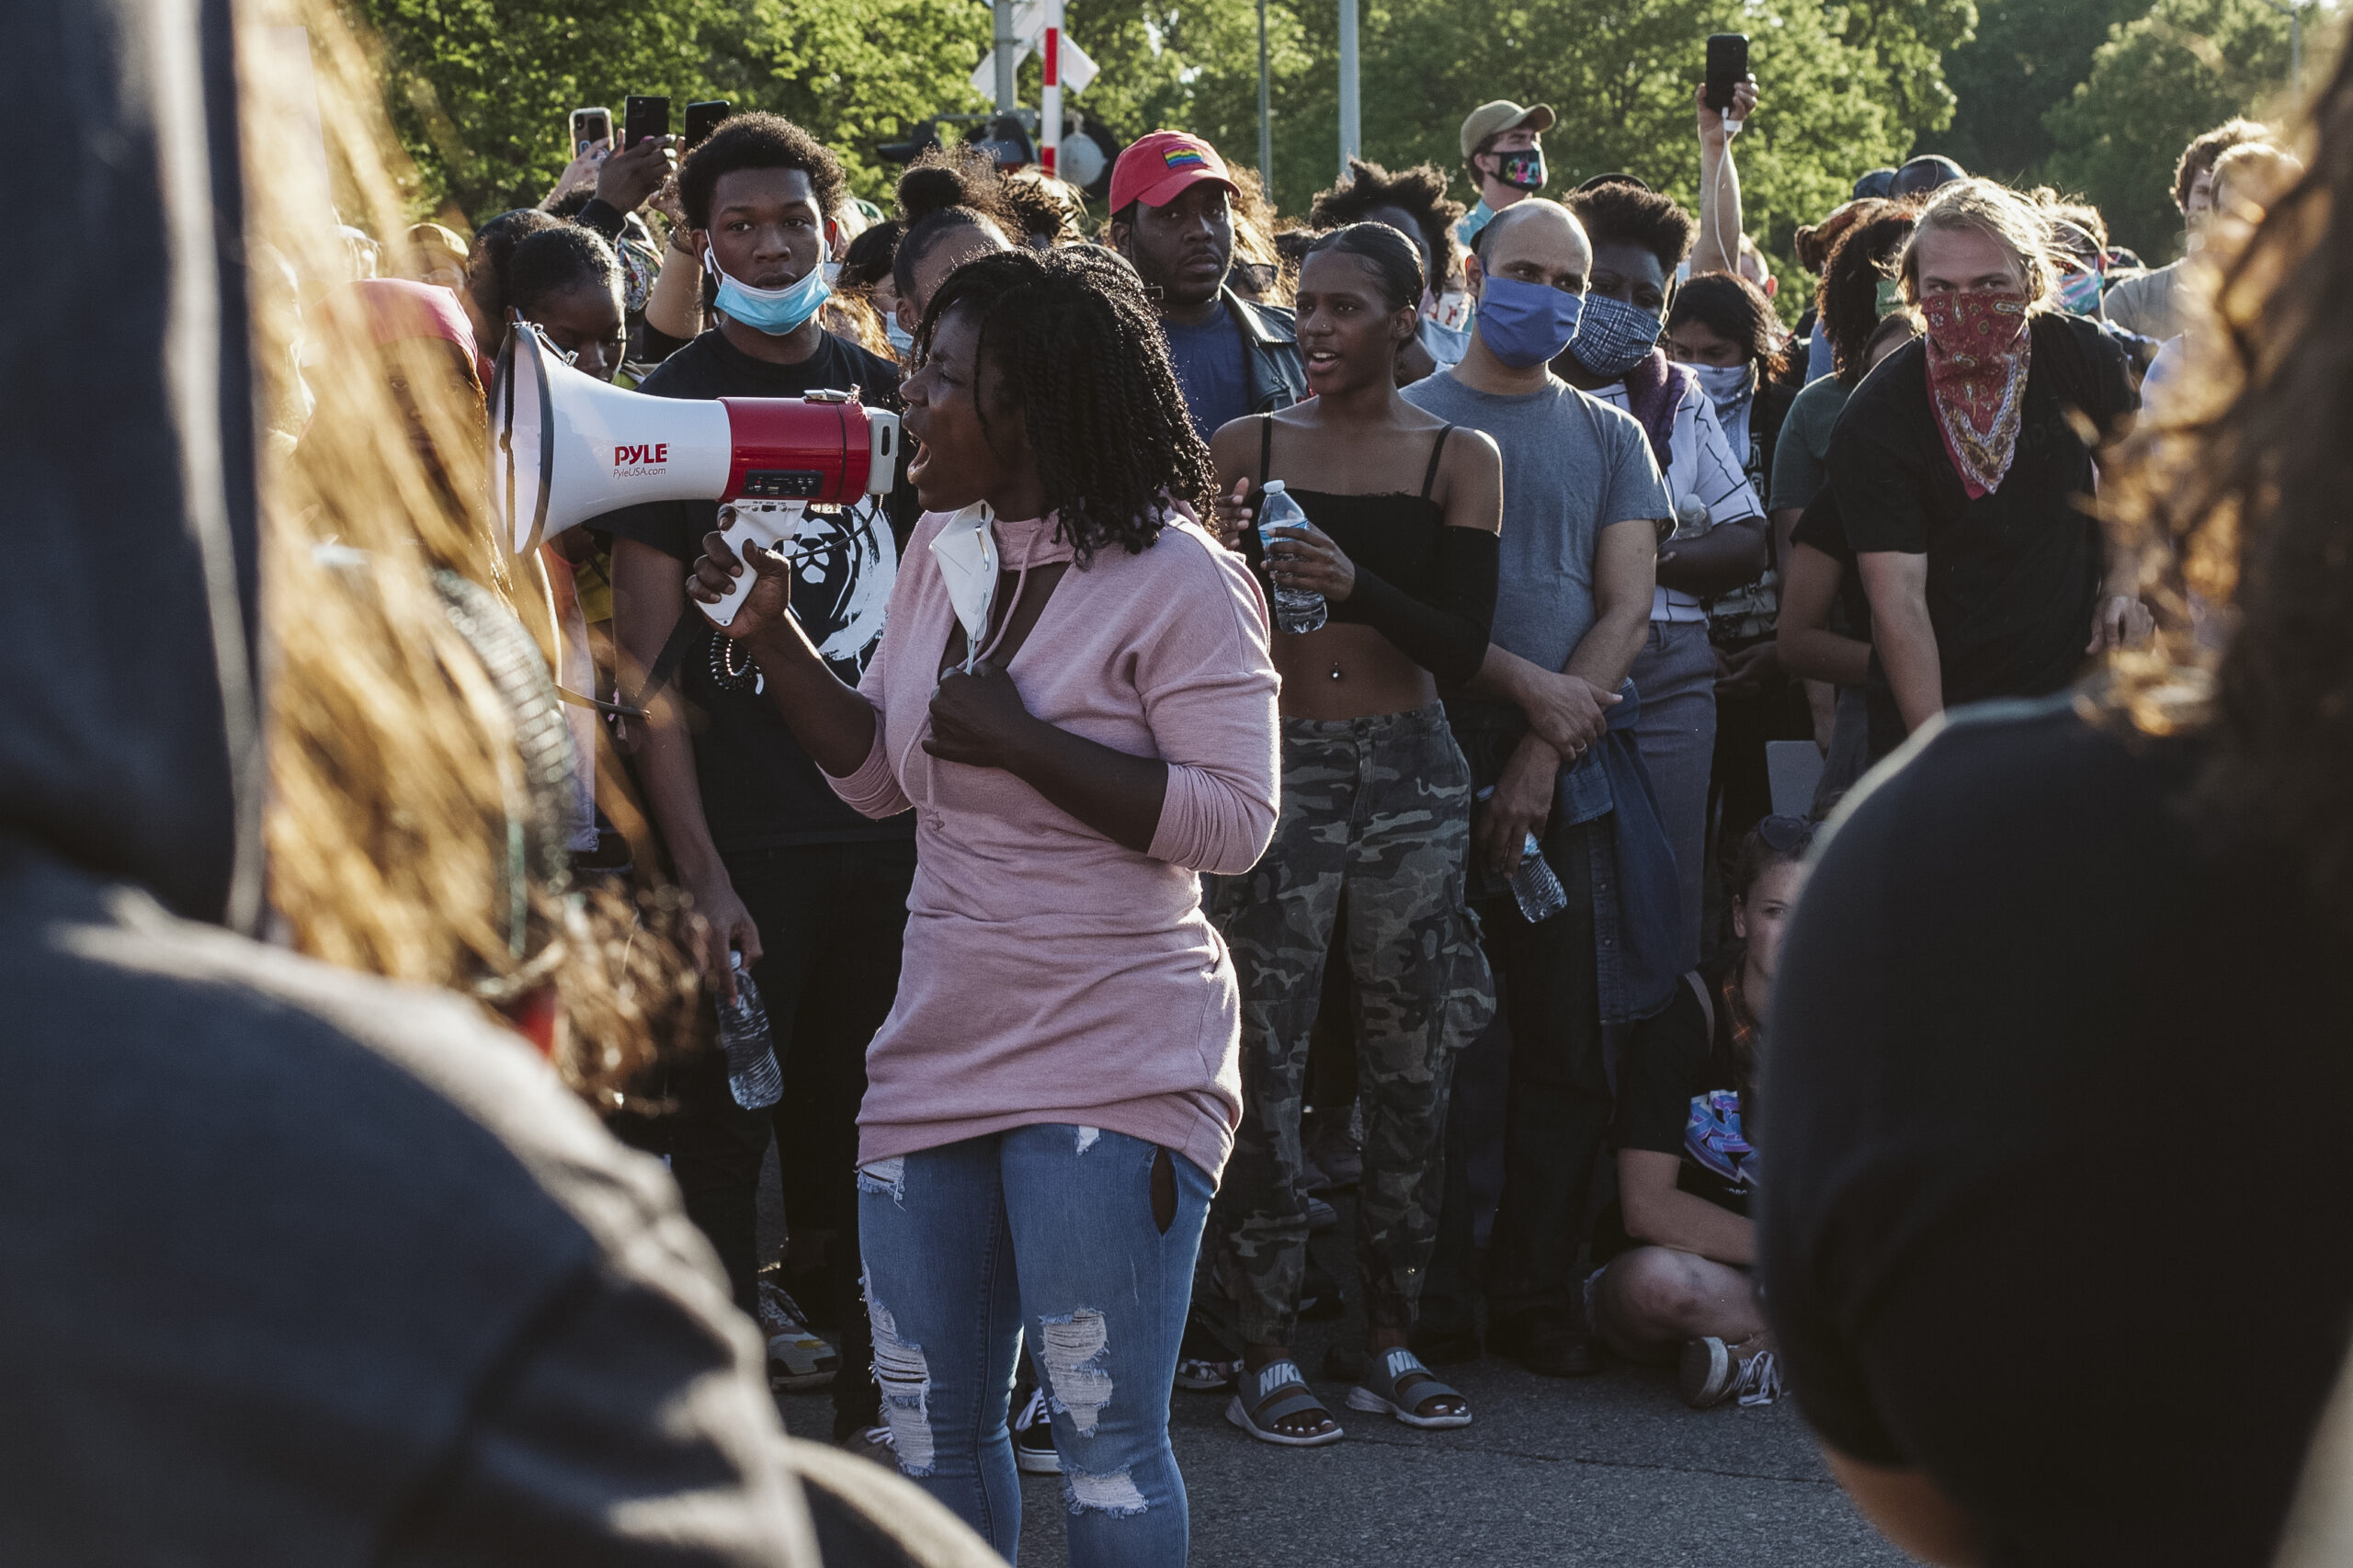 Brandi Grayson, founder and CEO of Urban Triage in Madison, addresses protesters at a Black Lives Matter rally